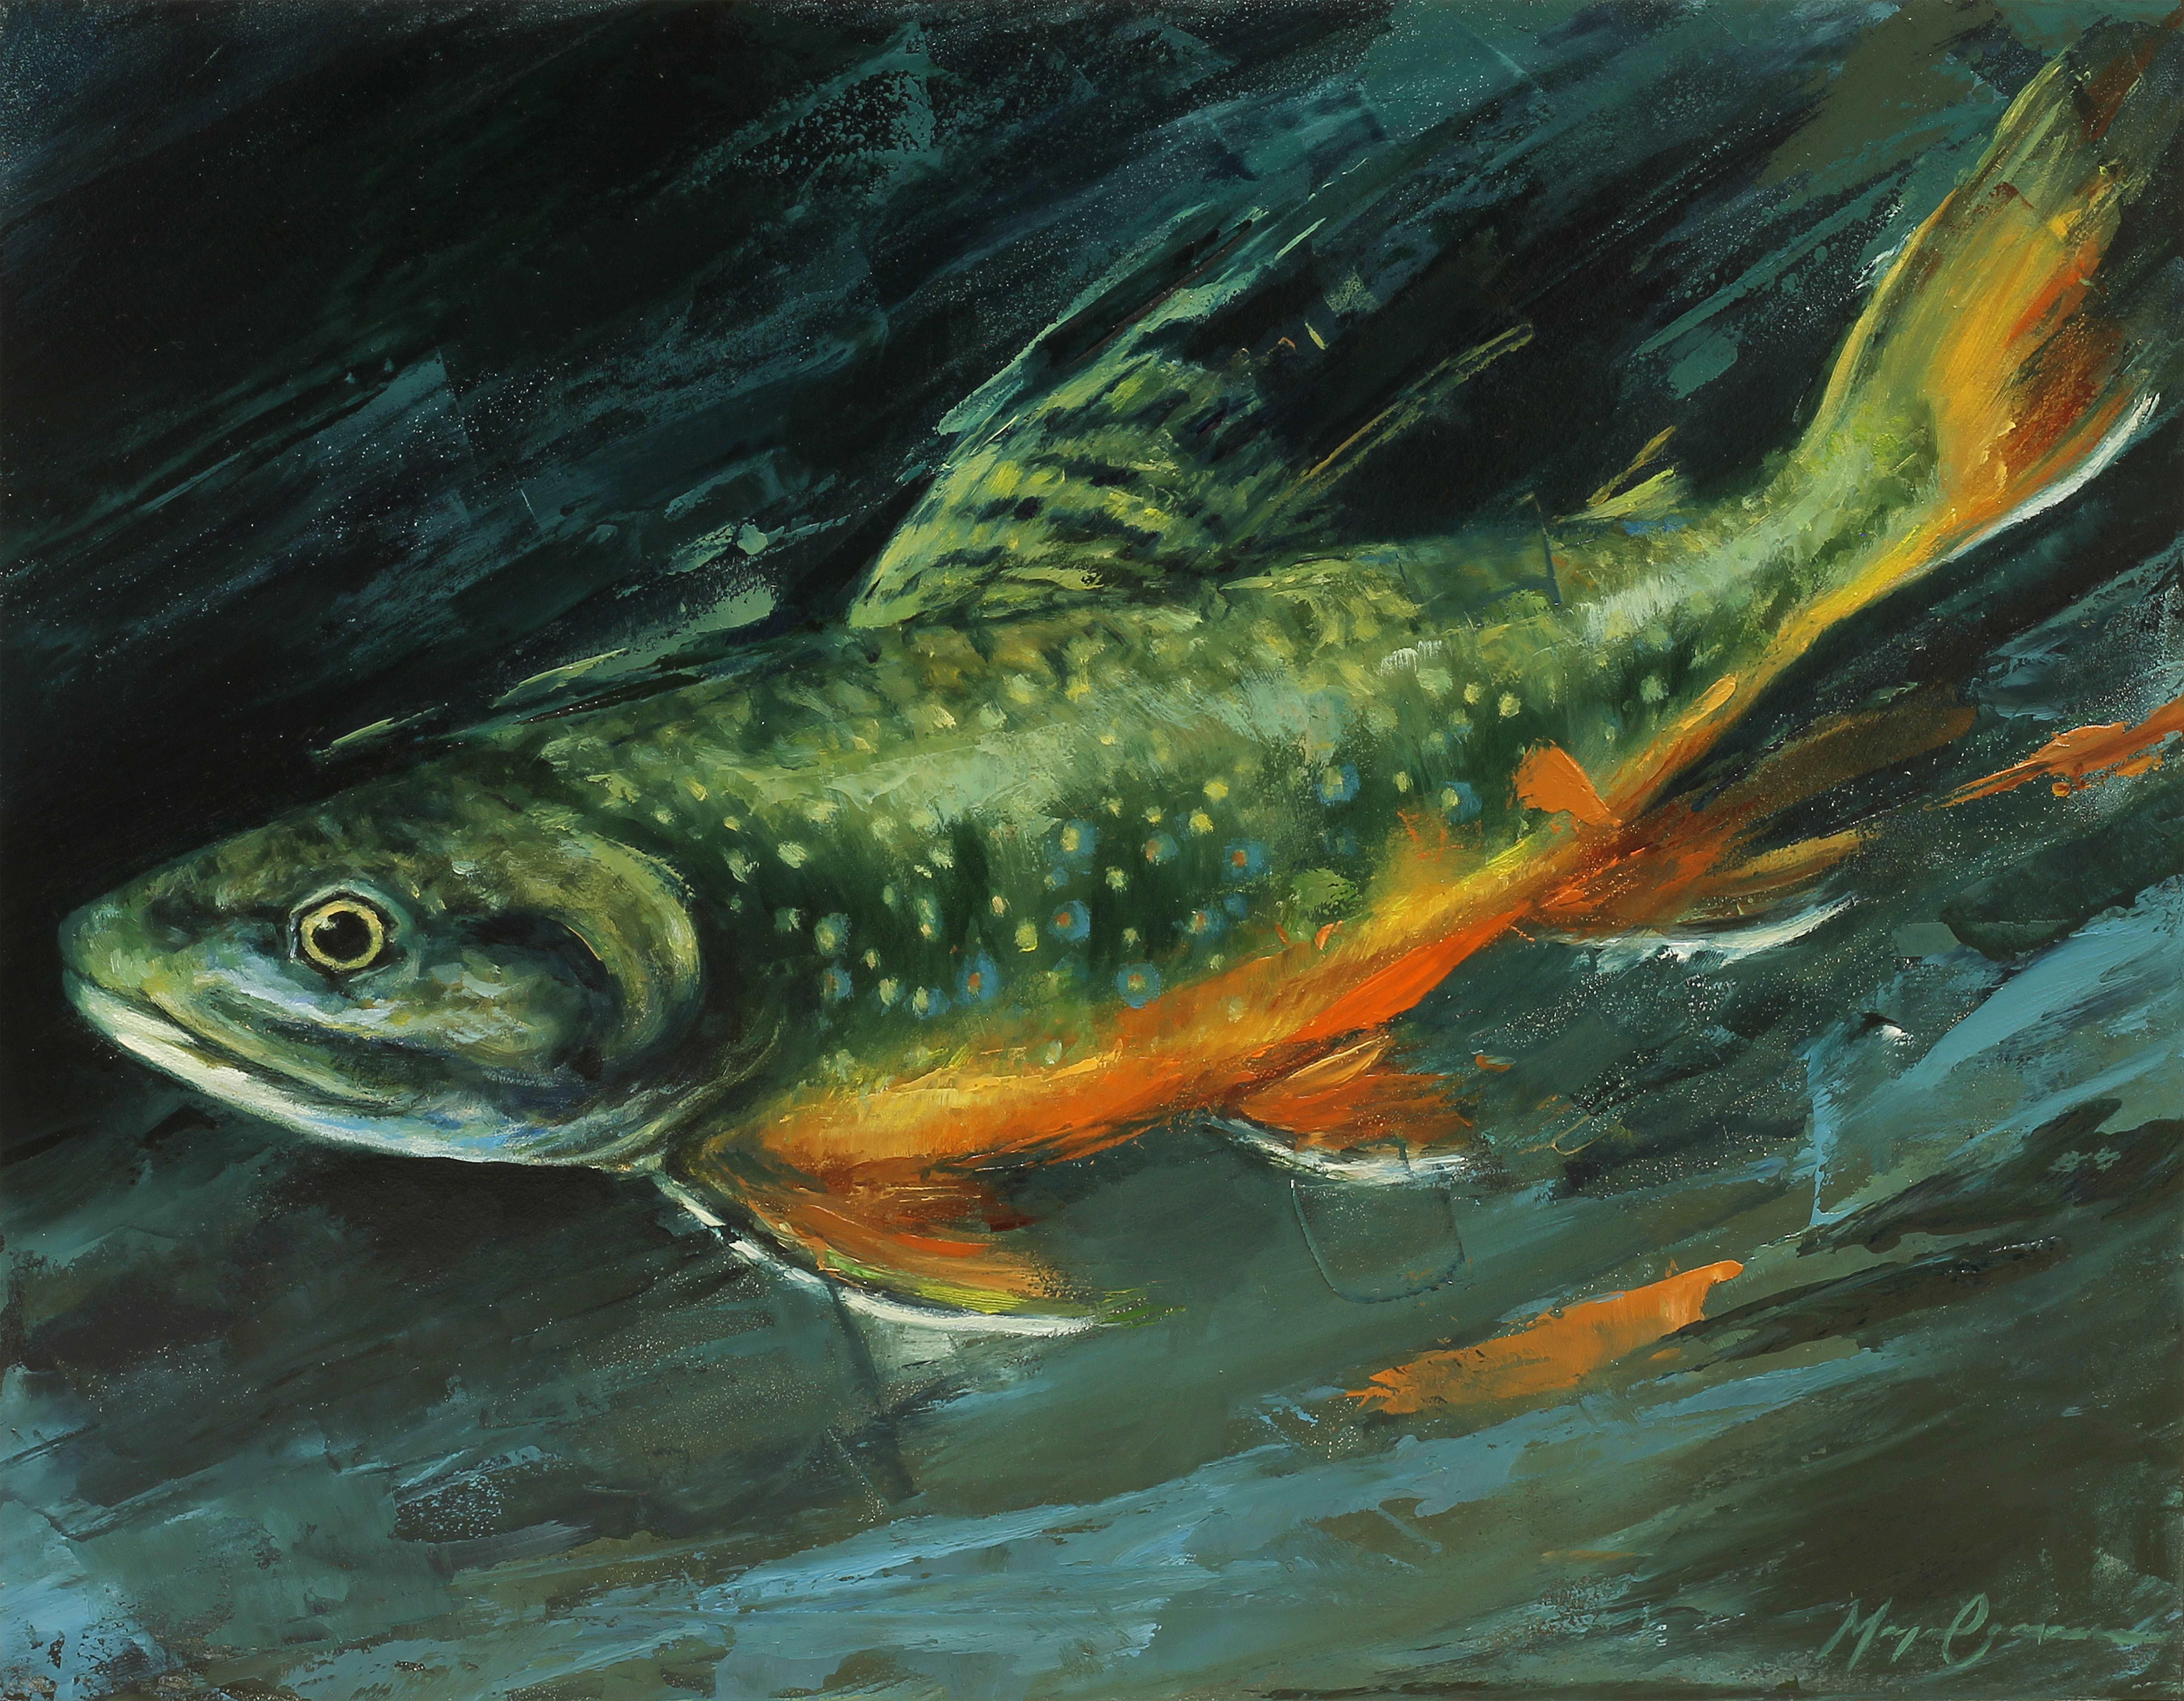 Morgan Cameron Figurative Painting - "Rainbow Trout, " Oil painting Featuring a rainbow trout